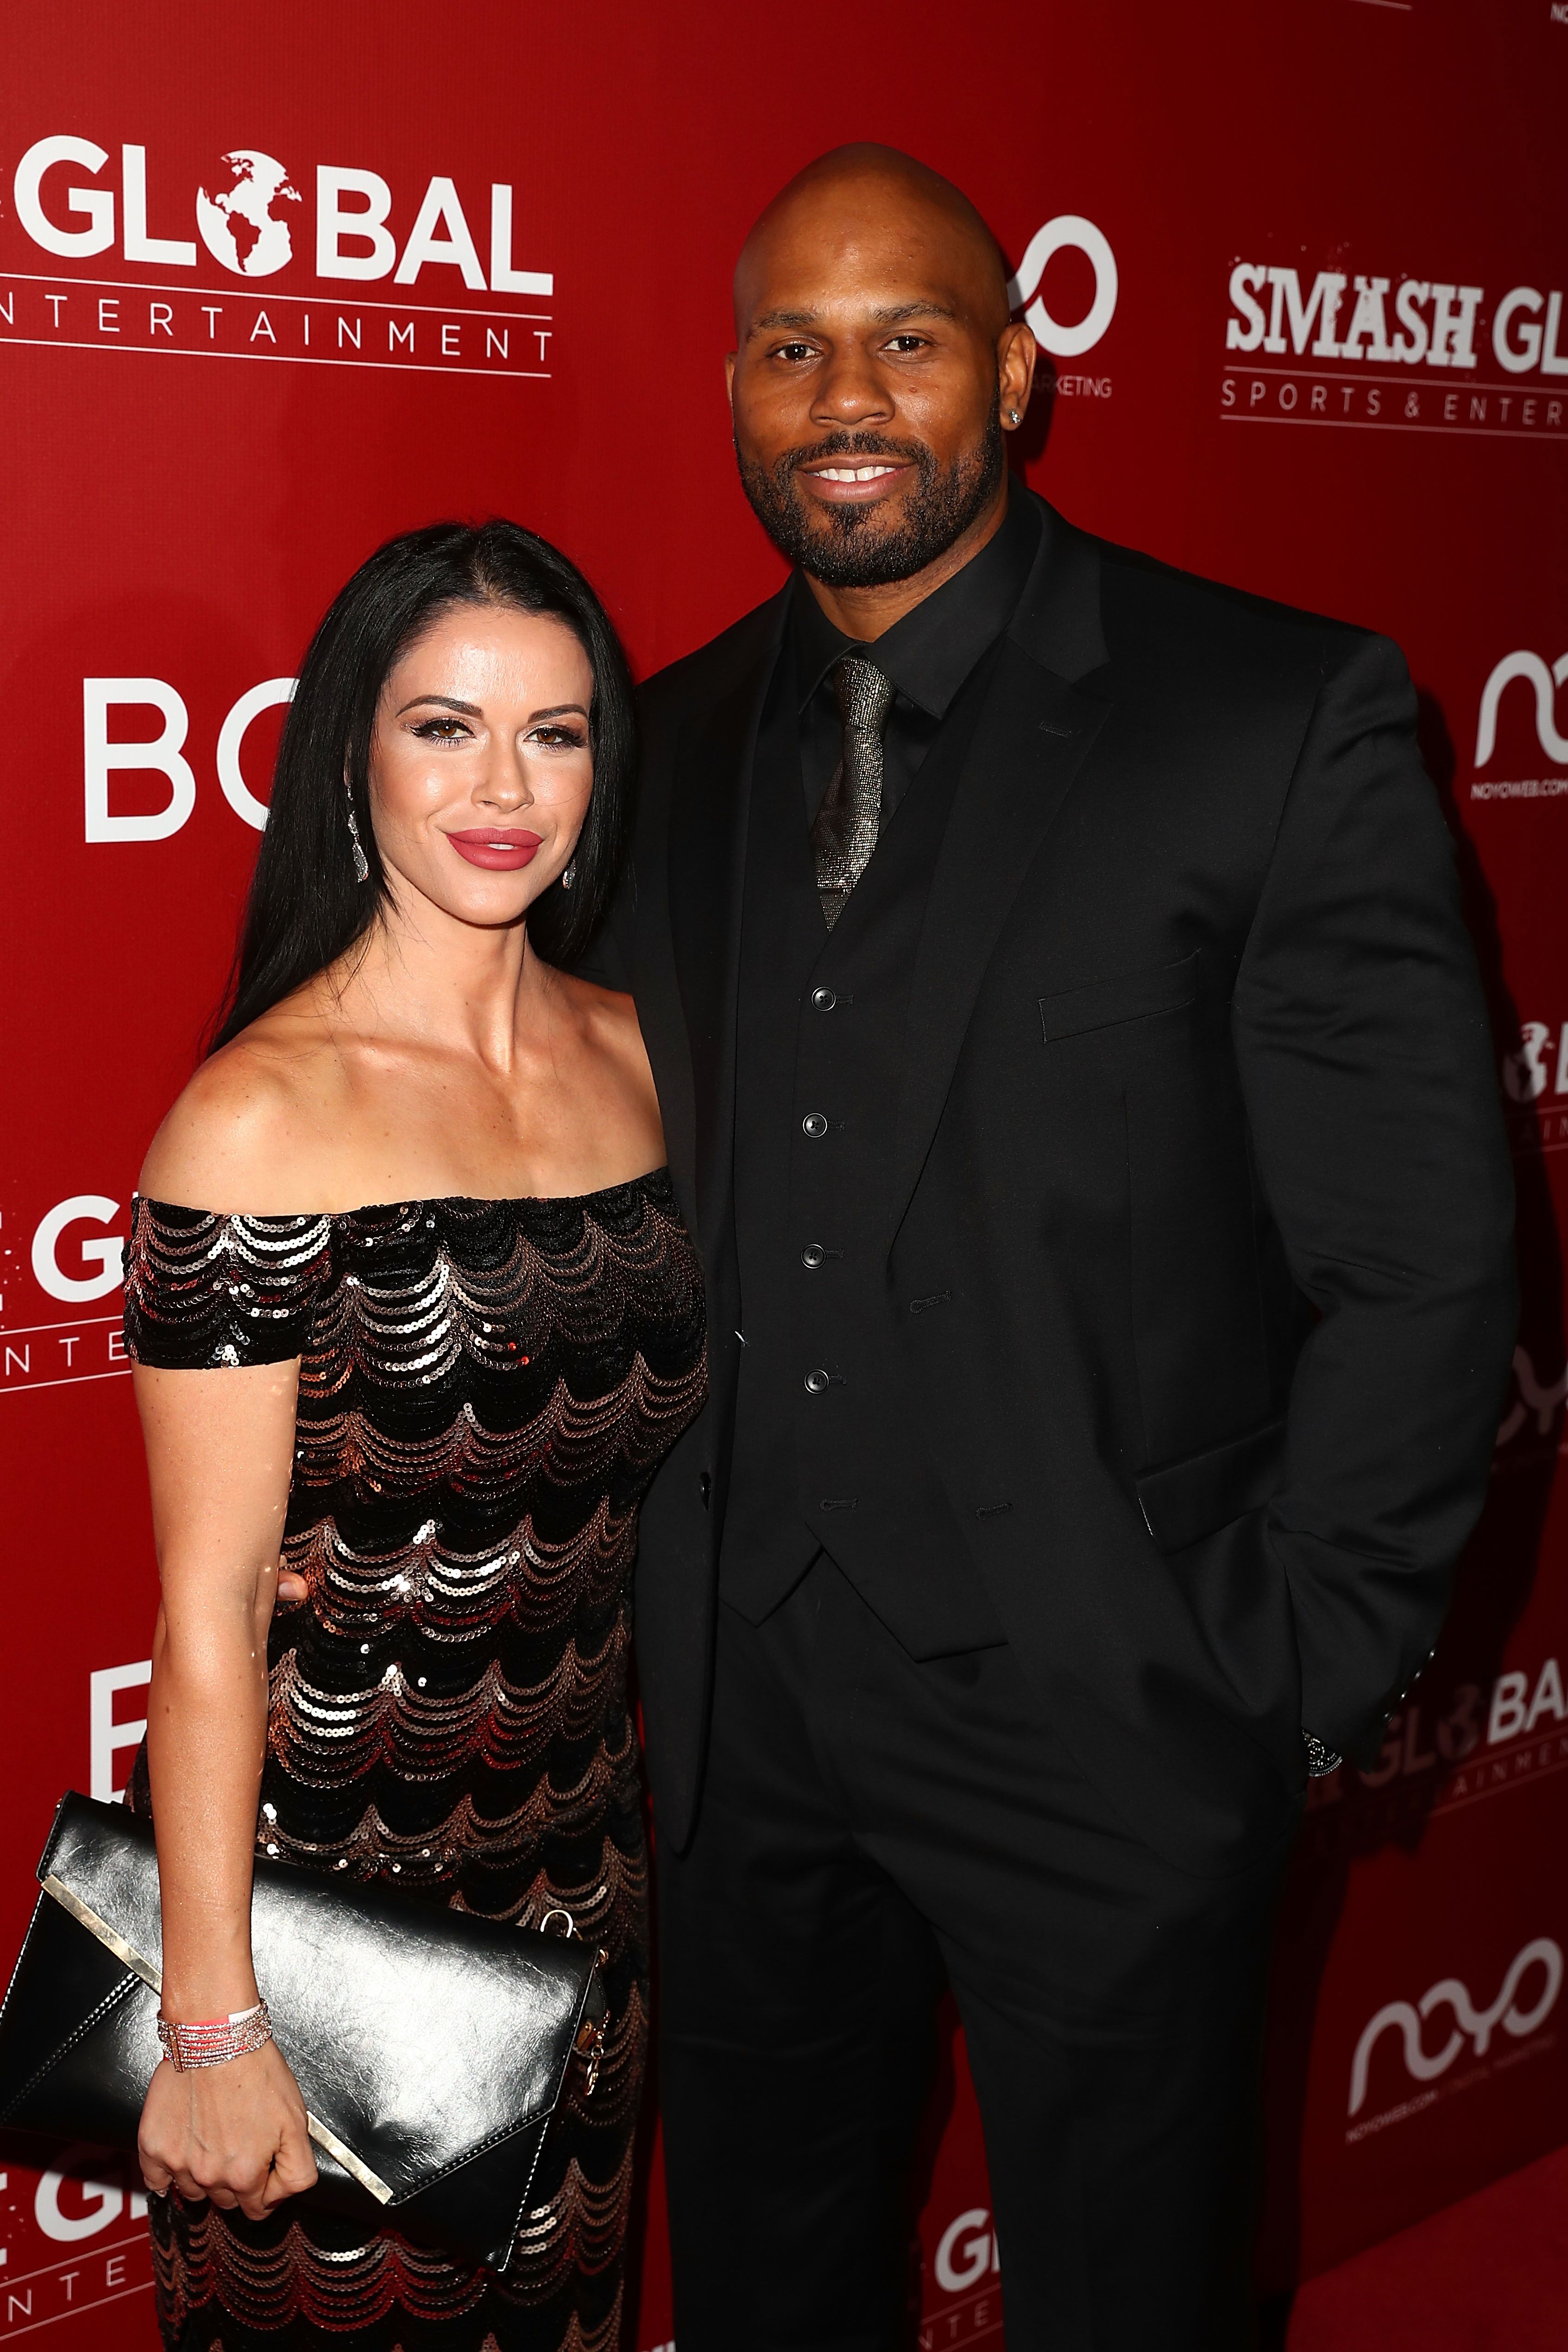 Shad Gaspard and his wife Siliana Gaspard arrive on the red carpet at the SMASH Global Night Of Champions on December 13, 2018, in Hollywood, California | Source: Joe Scarnici/Getty Images